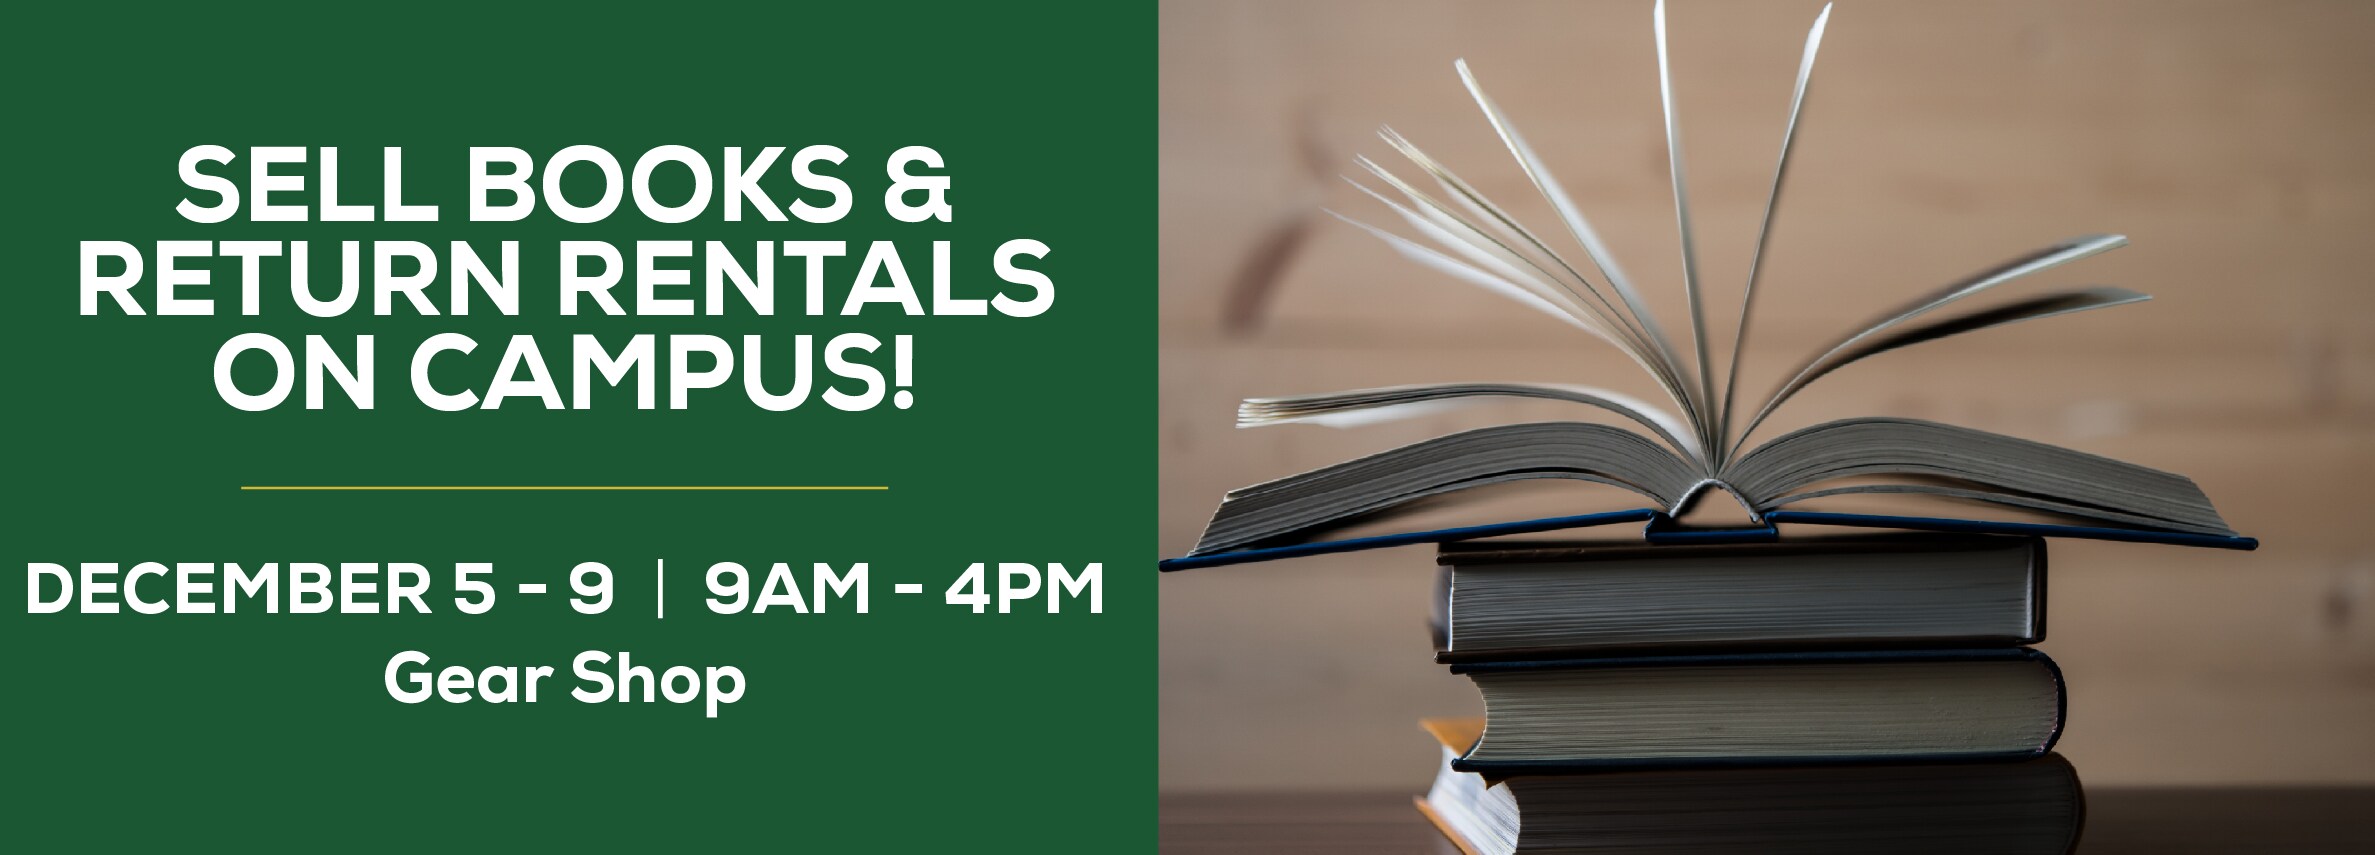 Sell books and return rentals on campus! December 5th through 9th. 9am to 4pm at the Gear Shop.